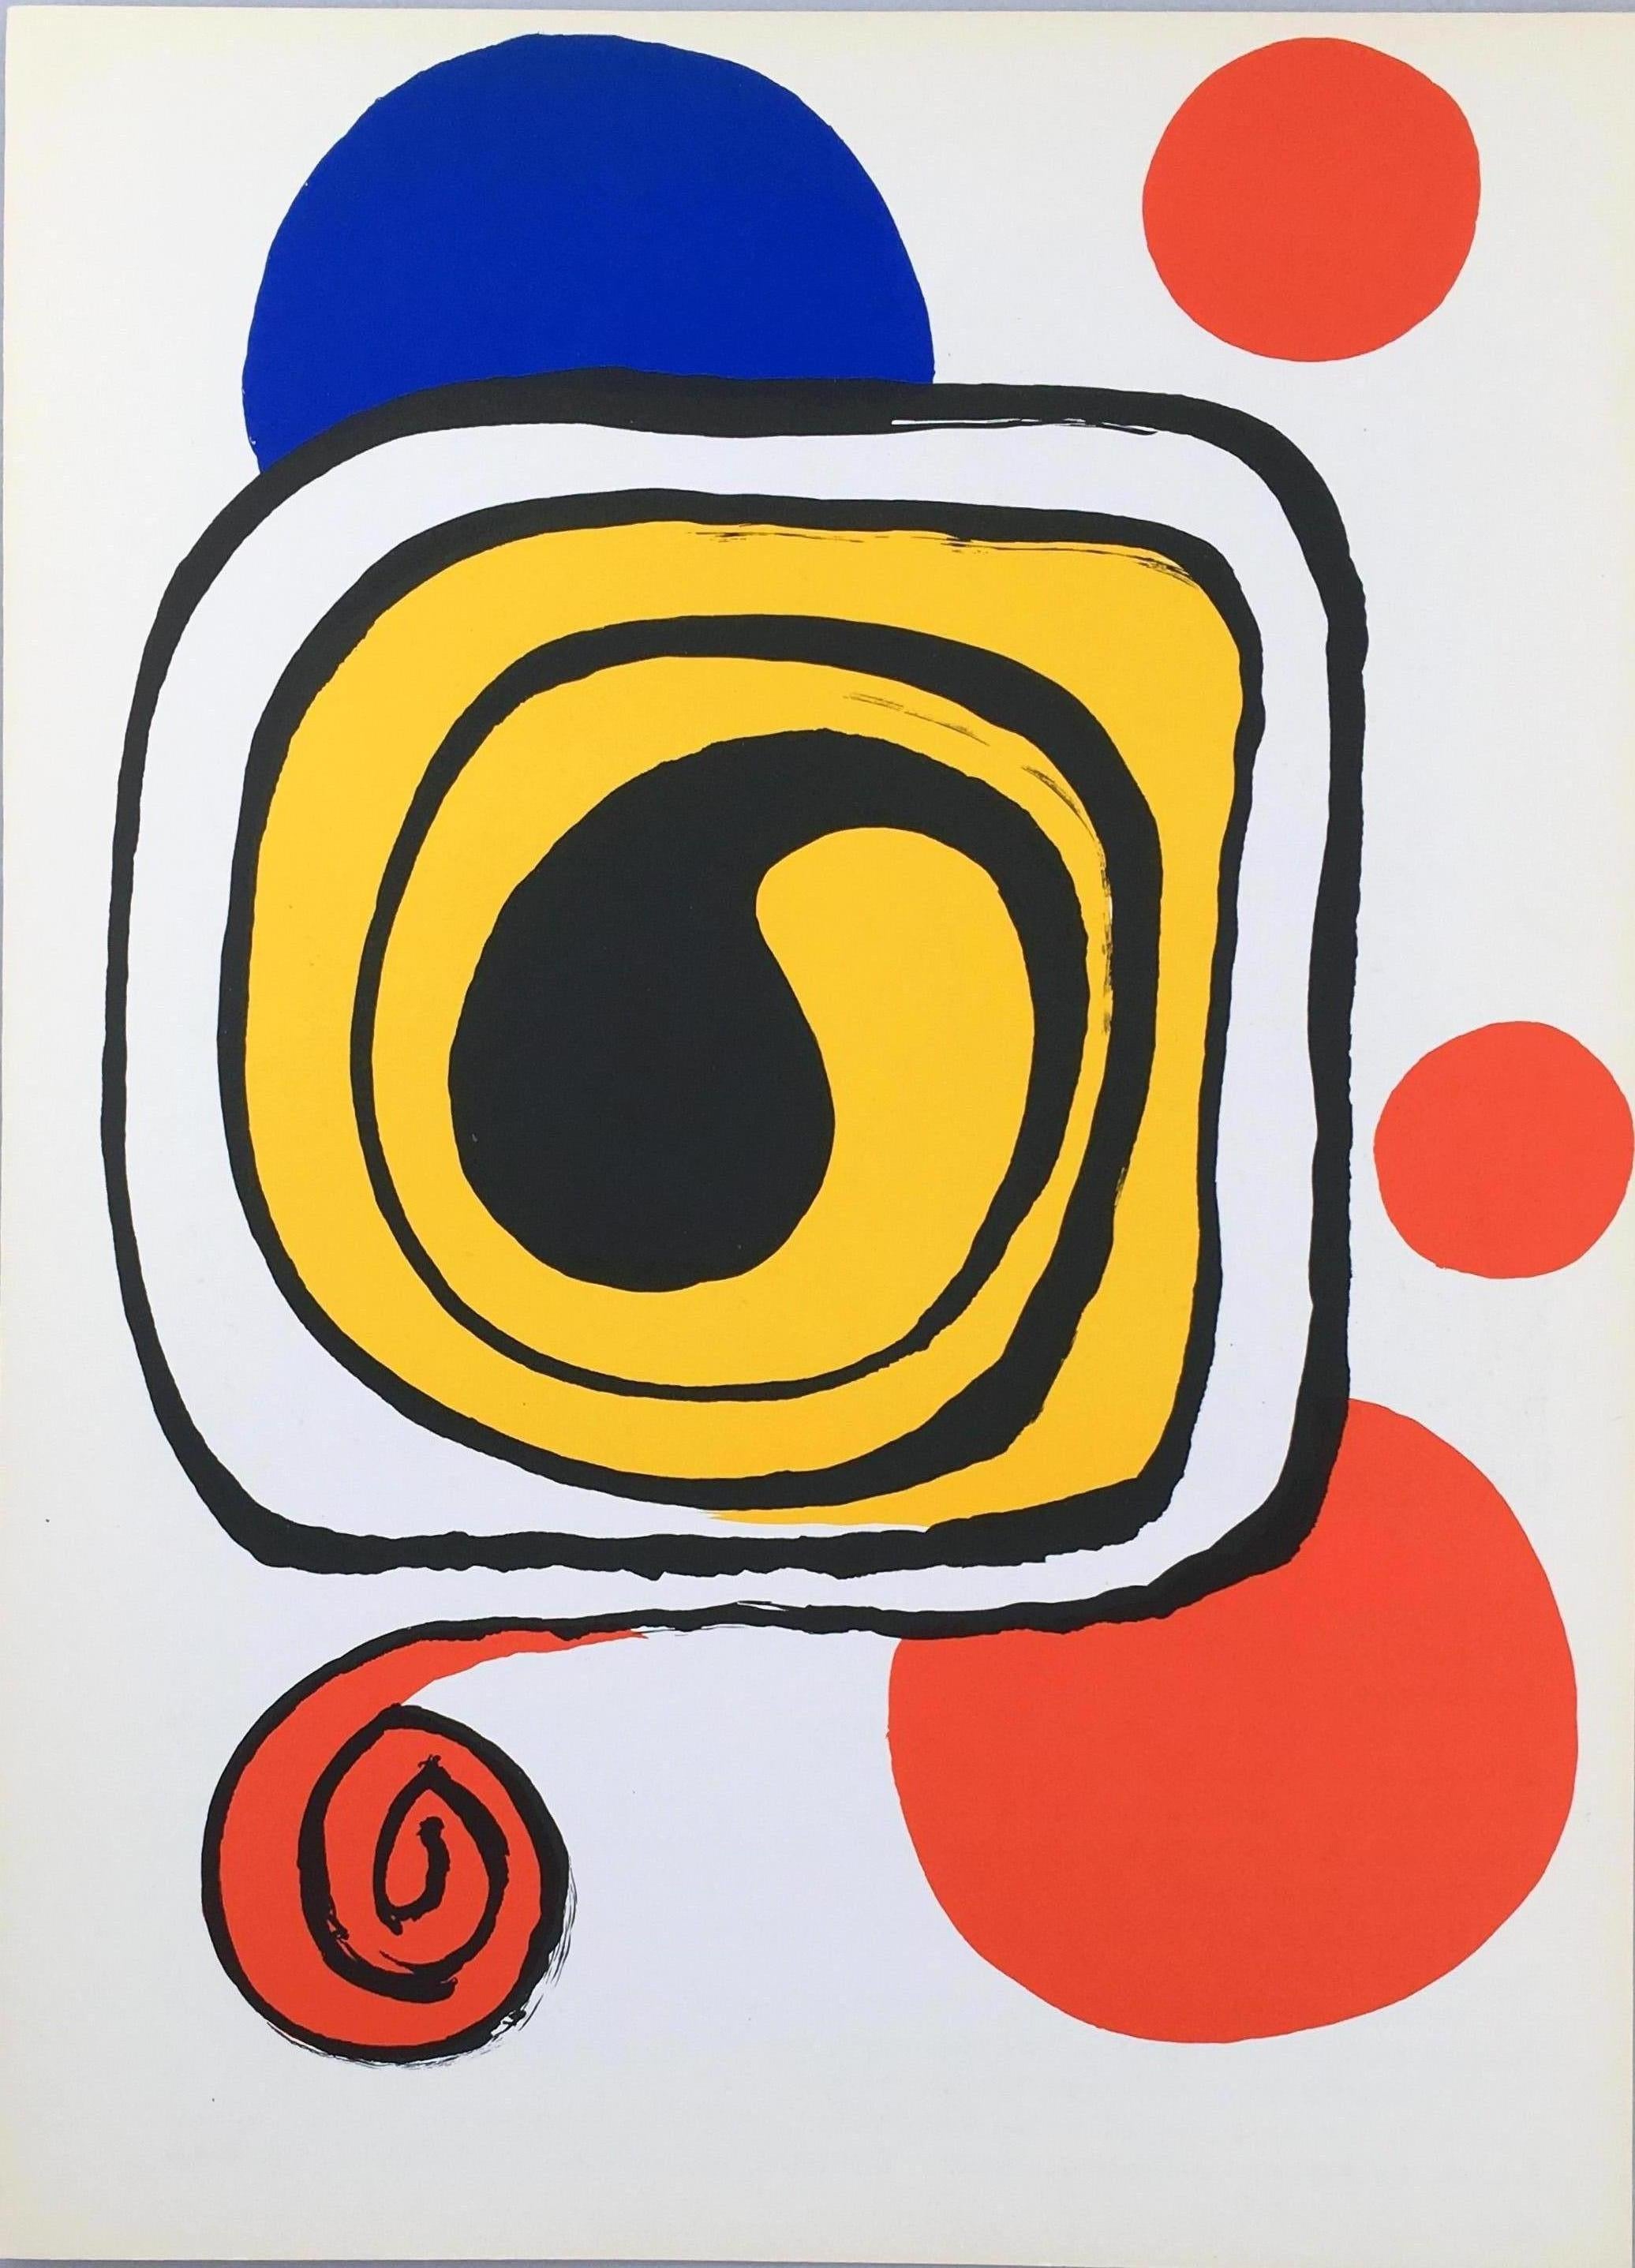 Vintage Original Alexander Calder Lithograph 1971 
Portfolio: Derriere Le Miroir
Published by: Galerie Maeght, Paris, 1971

Medium: Lithograph in colors
Dimension: 11 x 15 inches
Condition: Very good condition for its age 
Unsigned from an edition